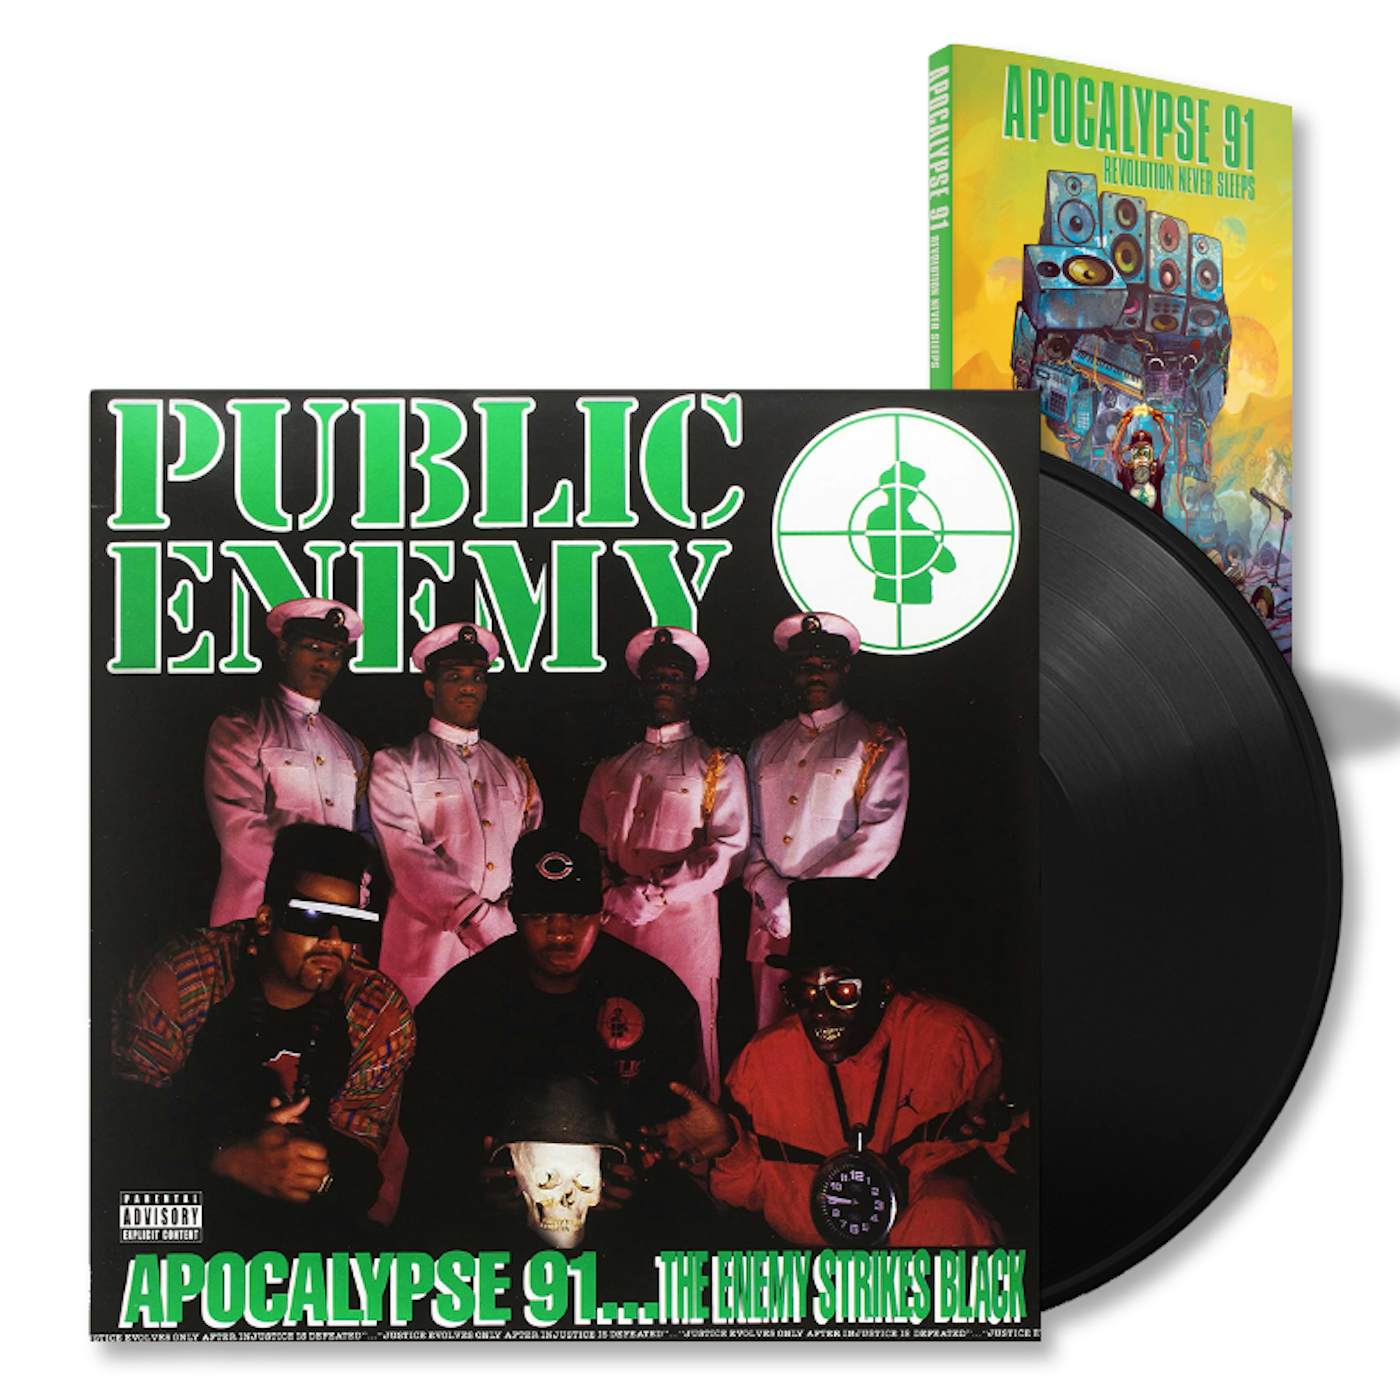 Public Enemy - 'Apocalypse 91: The Enemy Strikes Black' LP on Limited Edition Translucent Green Vinyl + Softcover Book